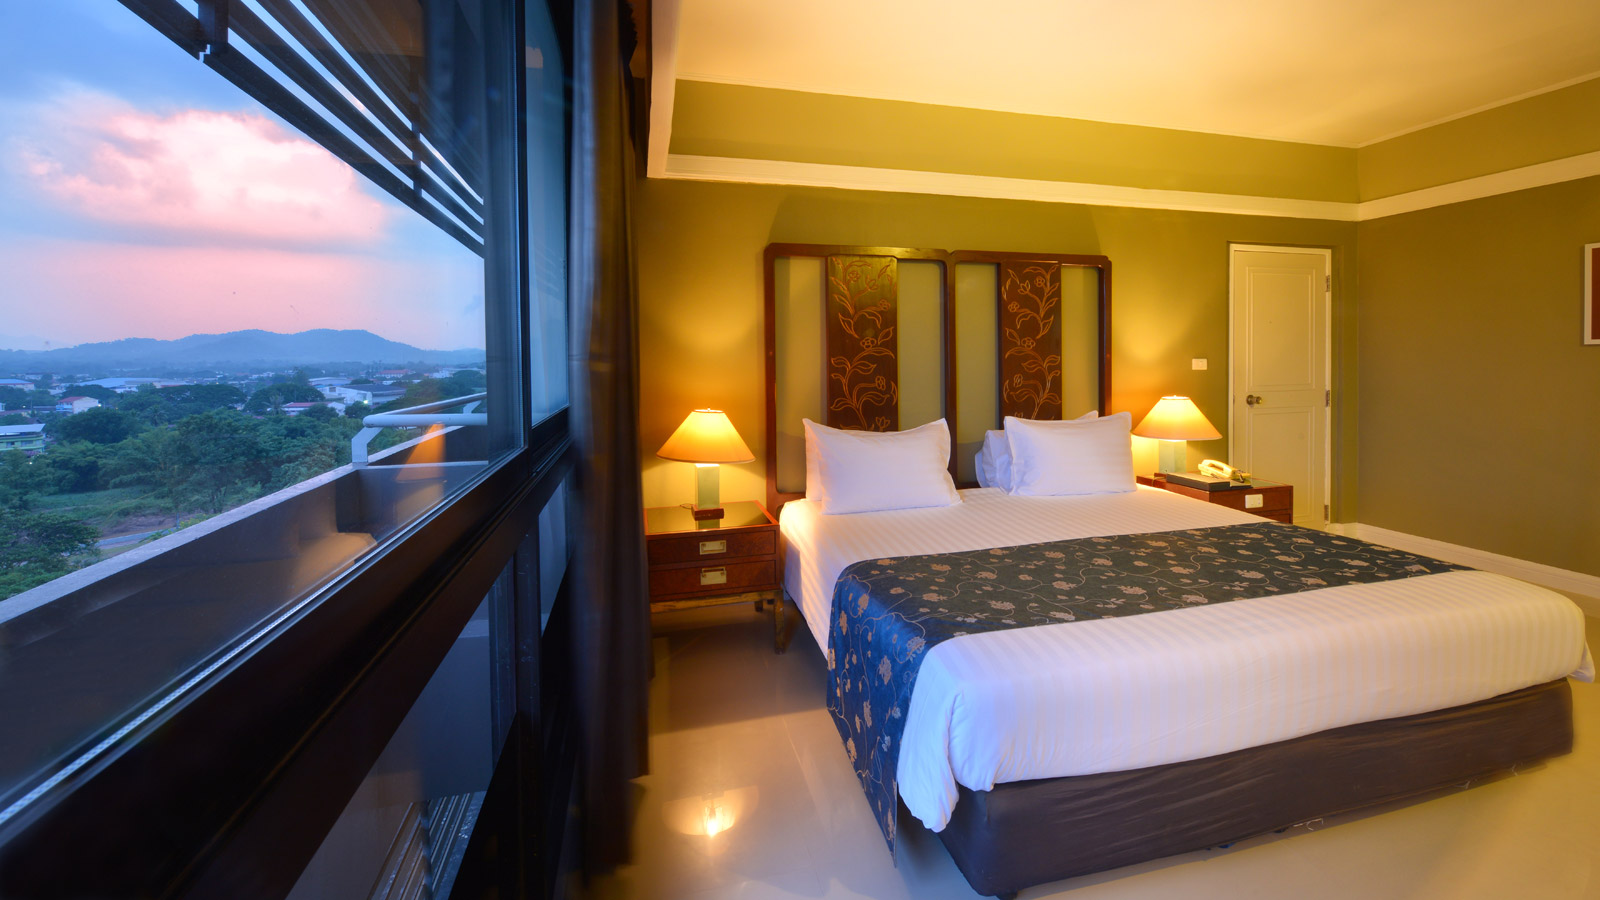 Executive Suites at Loei Palace Hotel